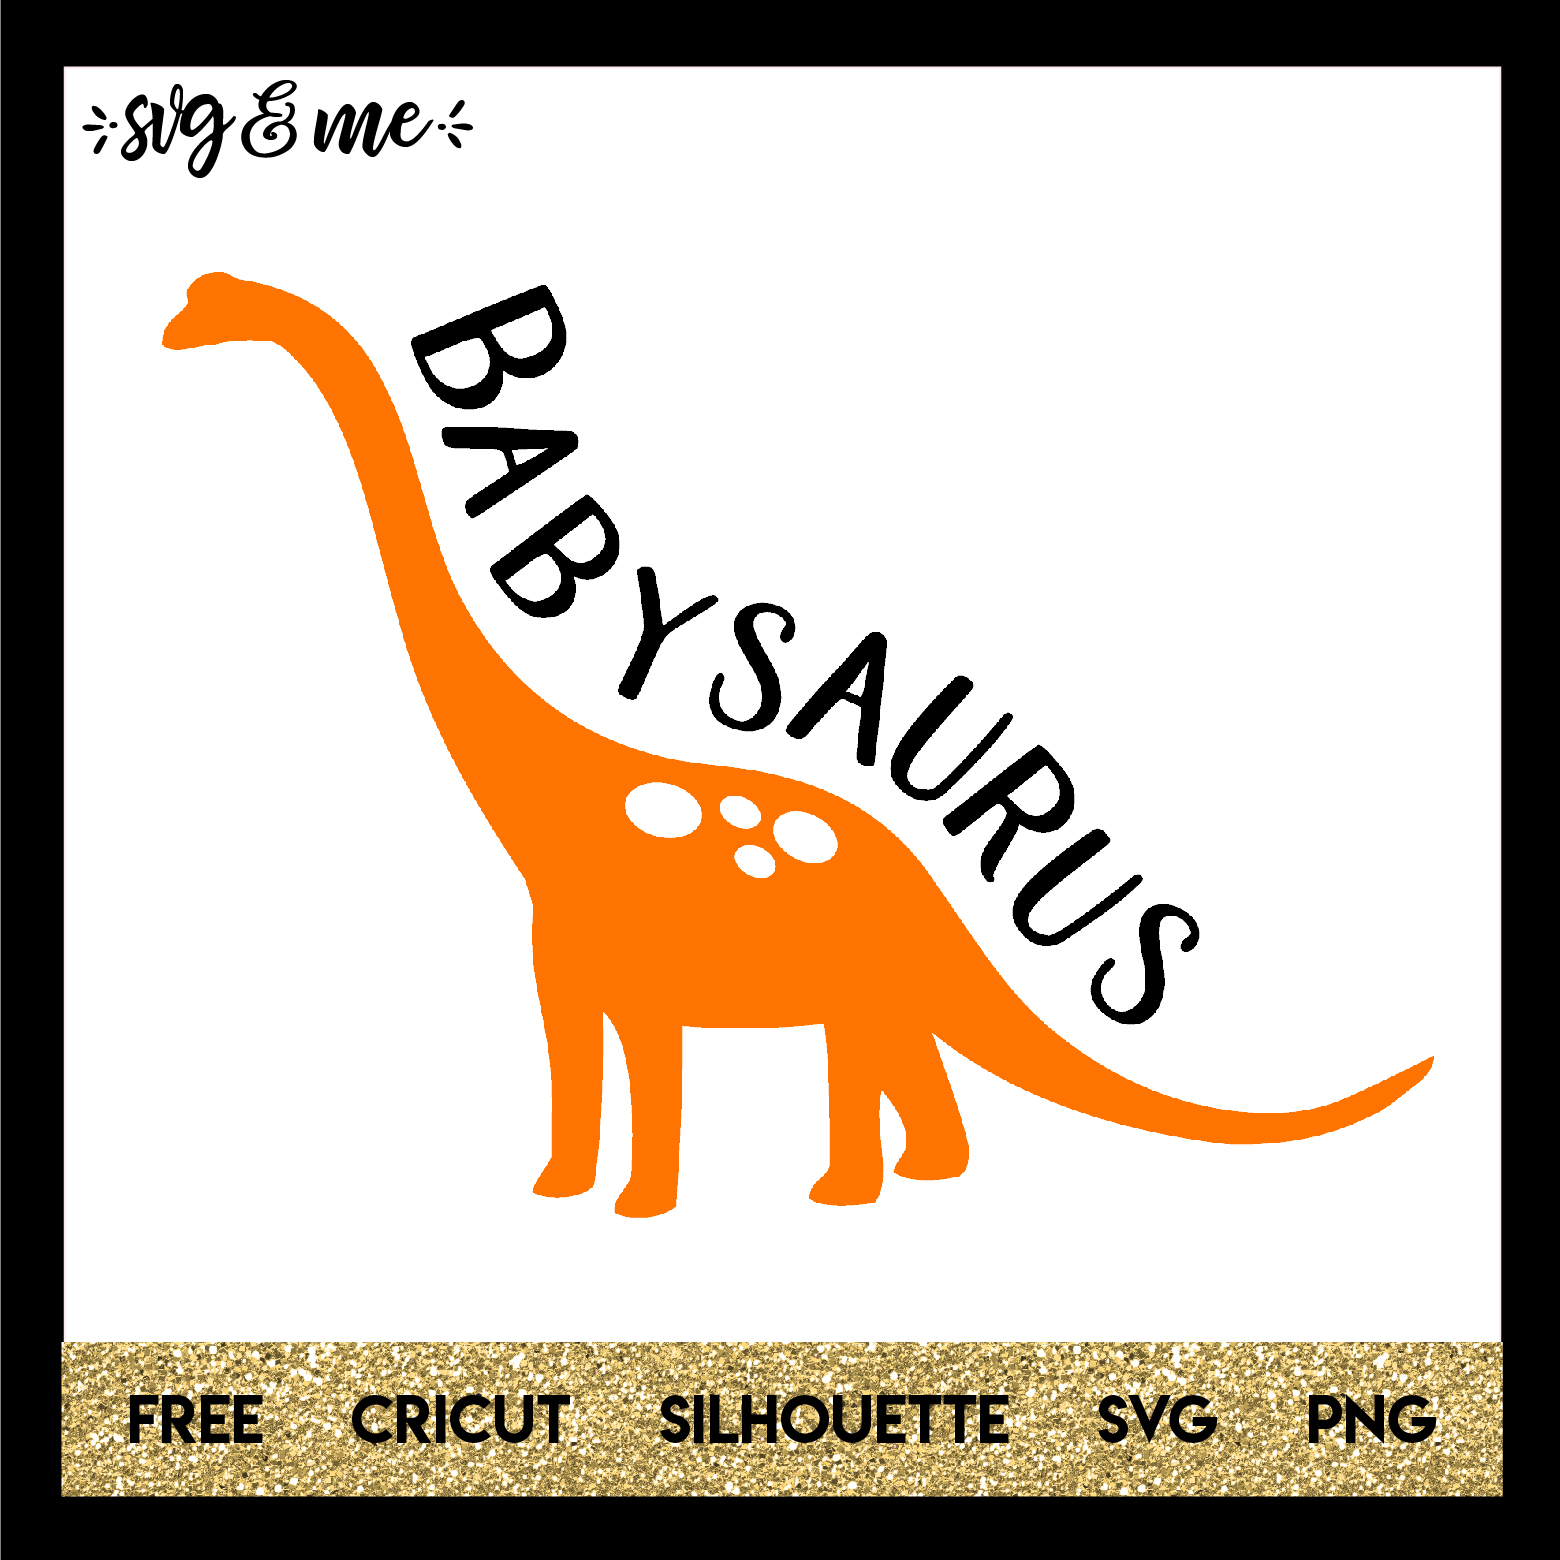 FREE SVG CUT FILE for Cricut and Silhouette DIY Projects - Babysaurus DInosaur New Baby SVG